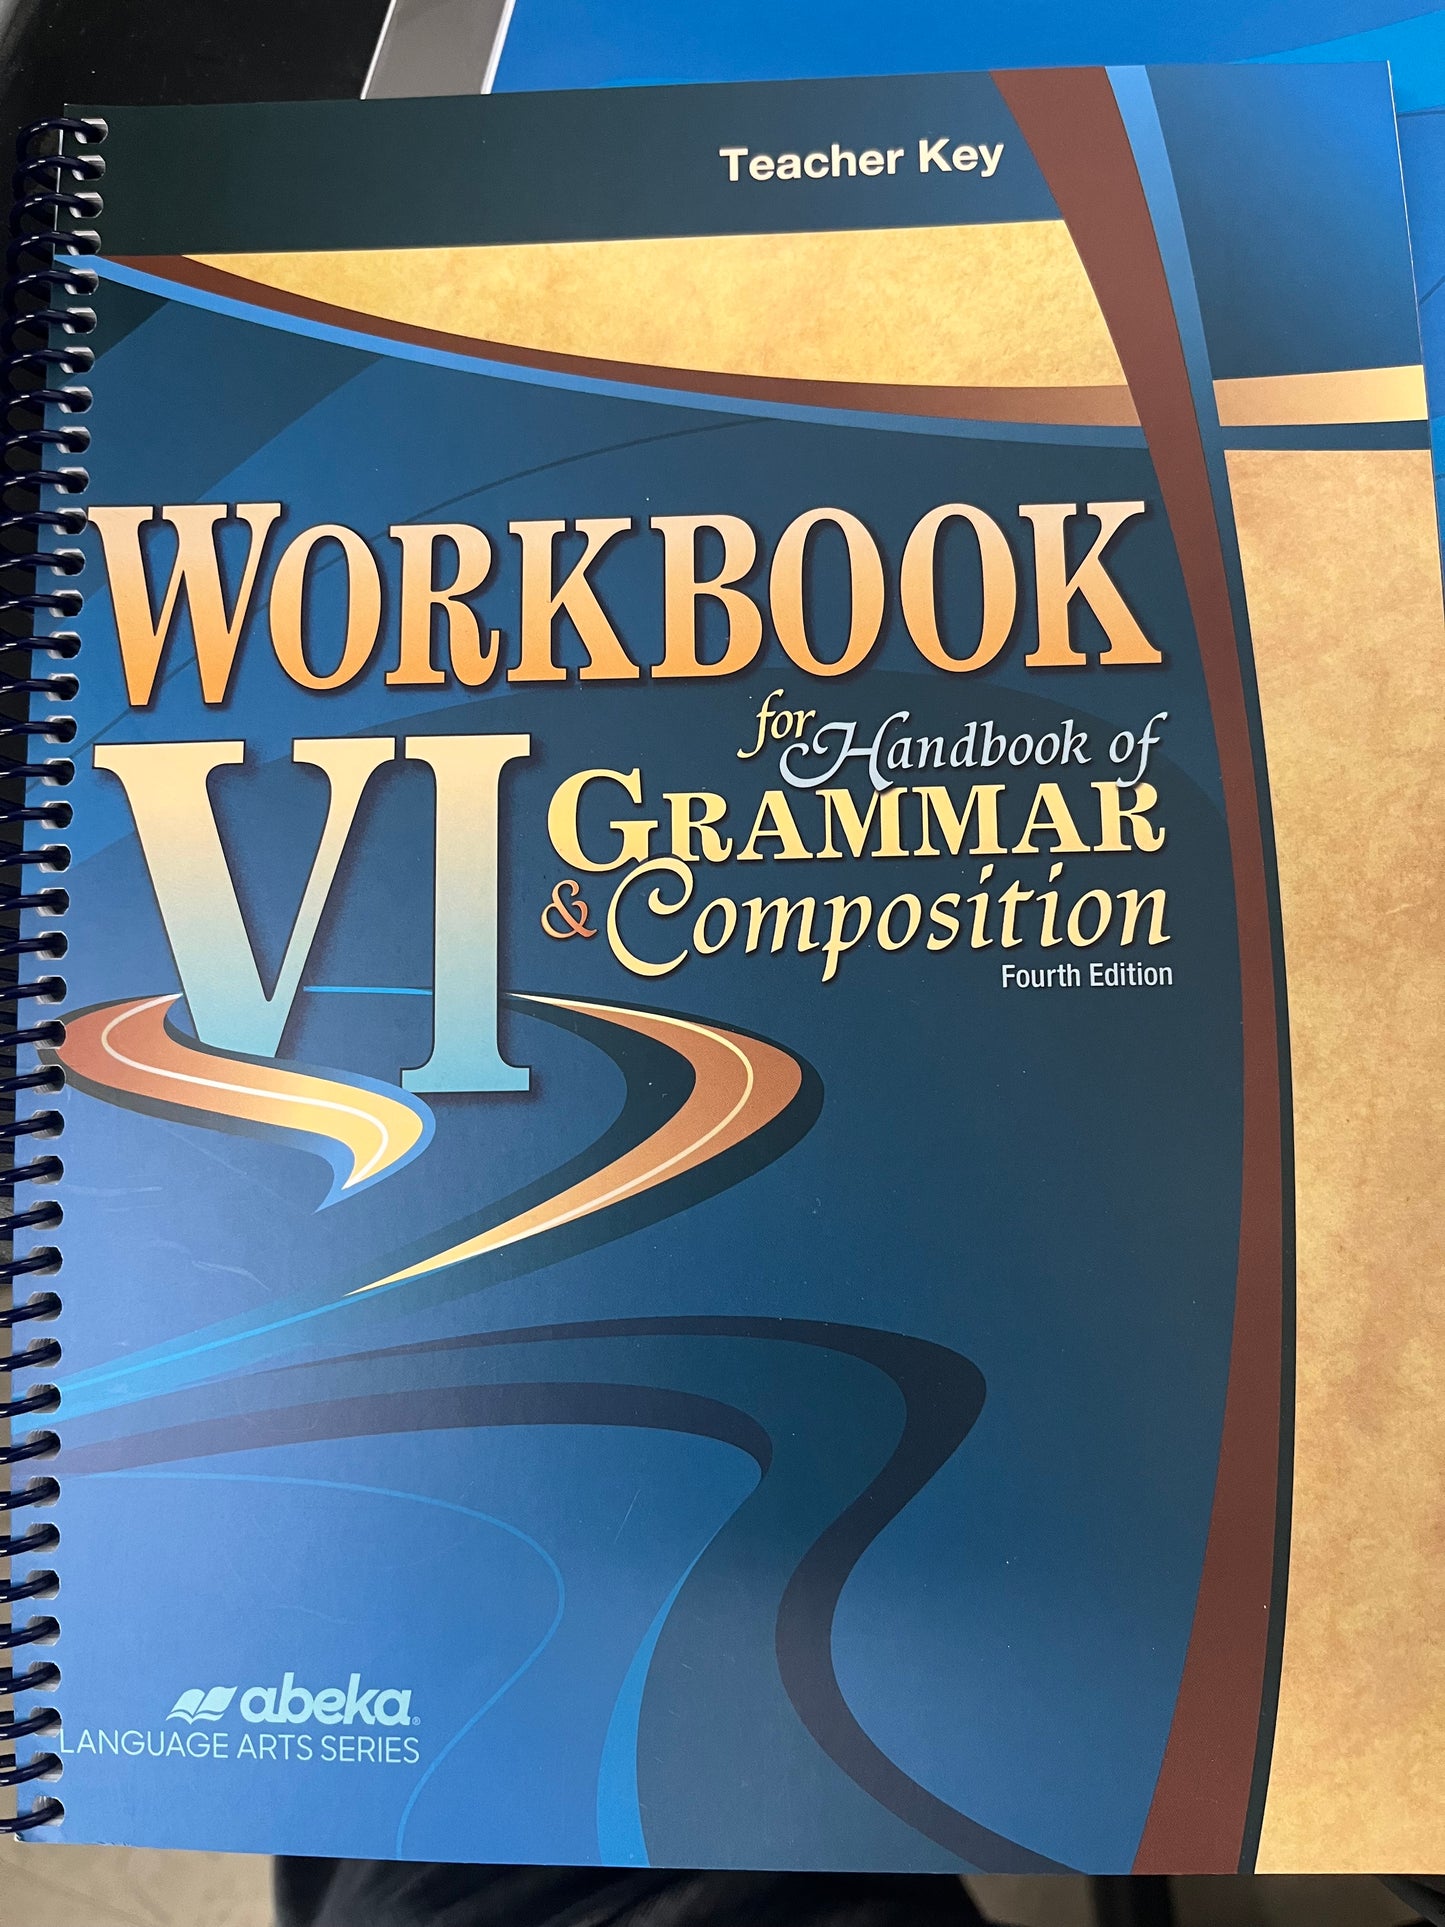 Workbook for Handbook of Grammar and Composition VI  (4th Ed.)